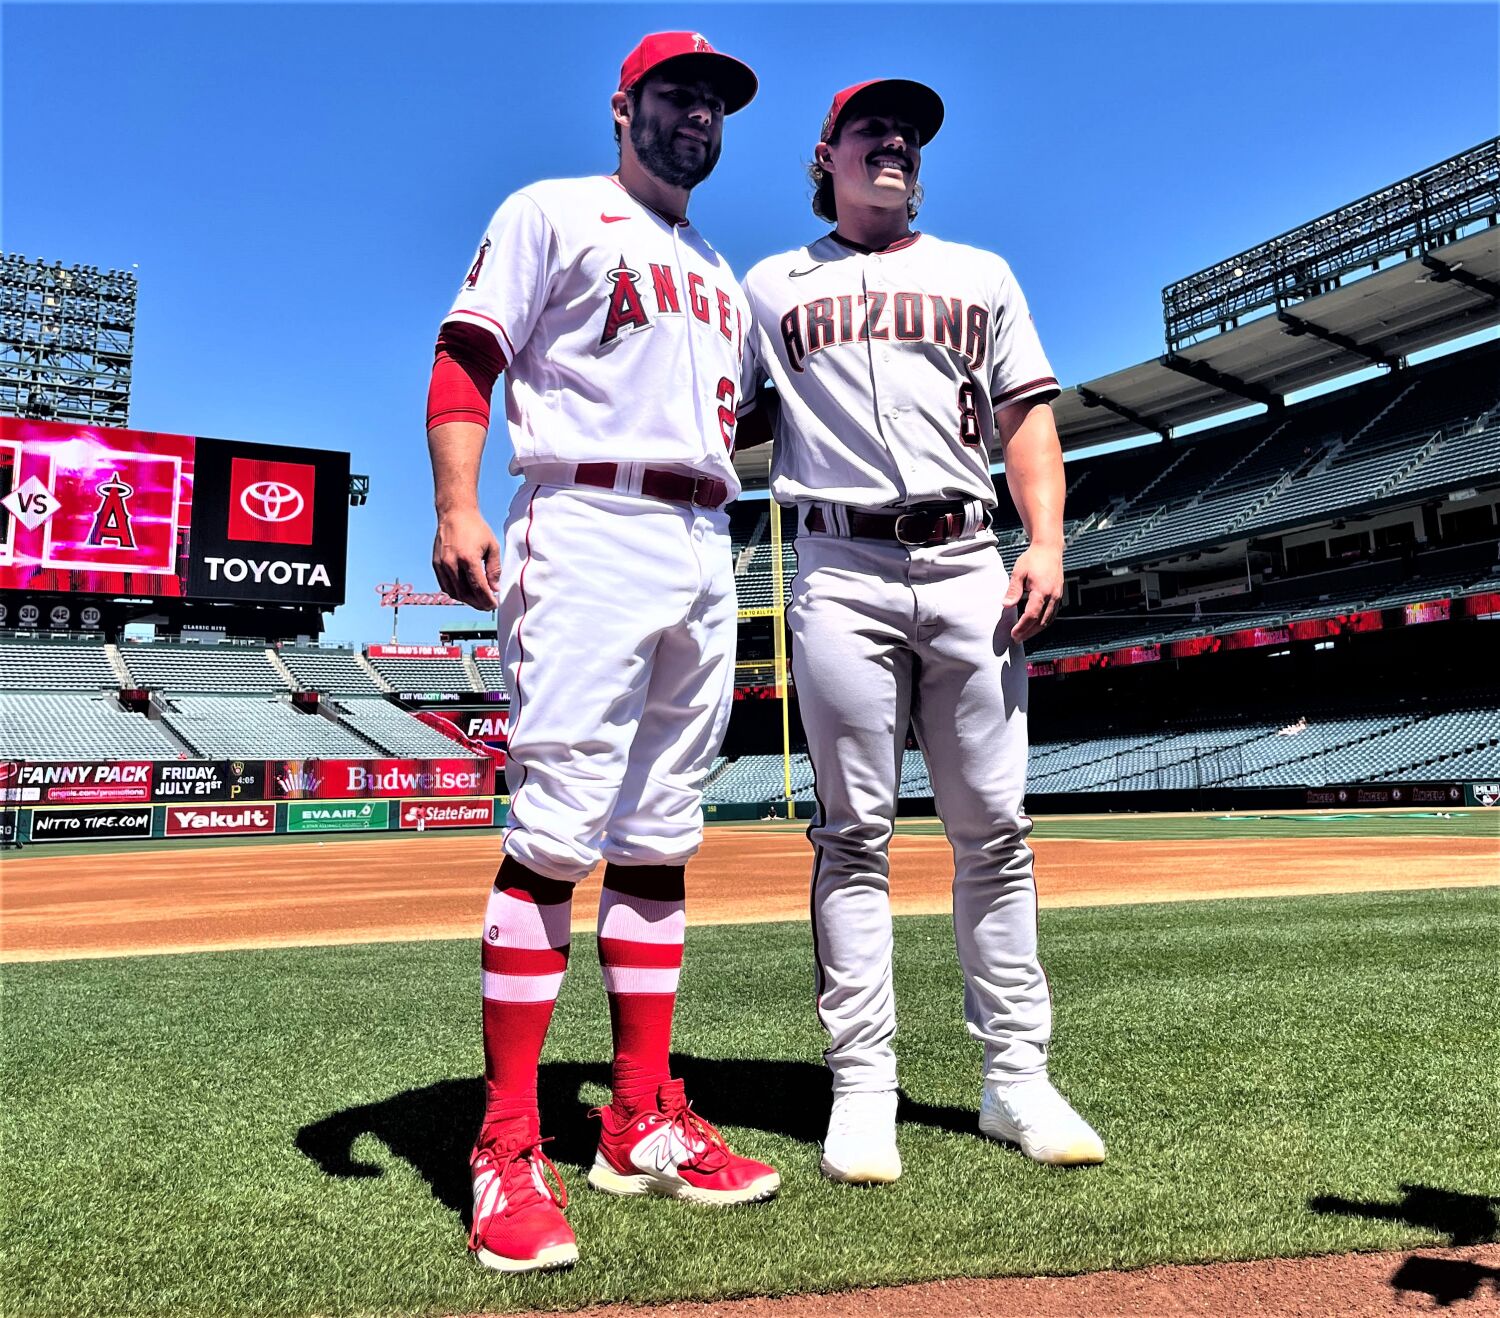 Angels' David Fletcher and Diamondbacks' Dominic Fletcher face off with dad in mind